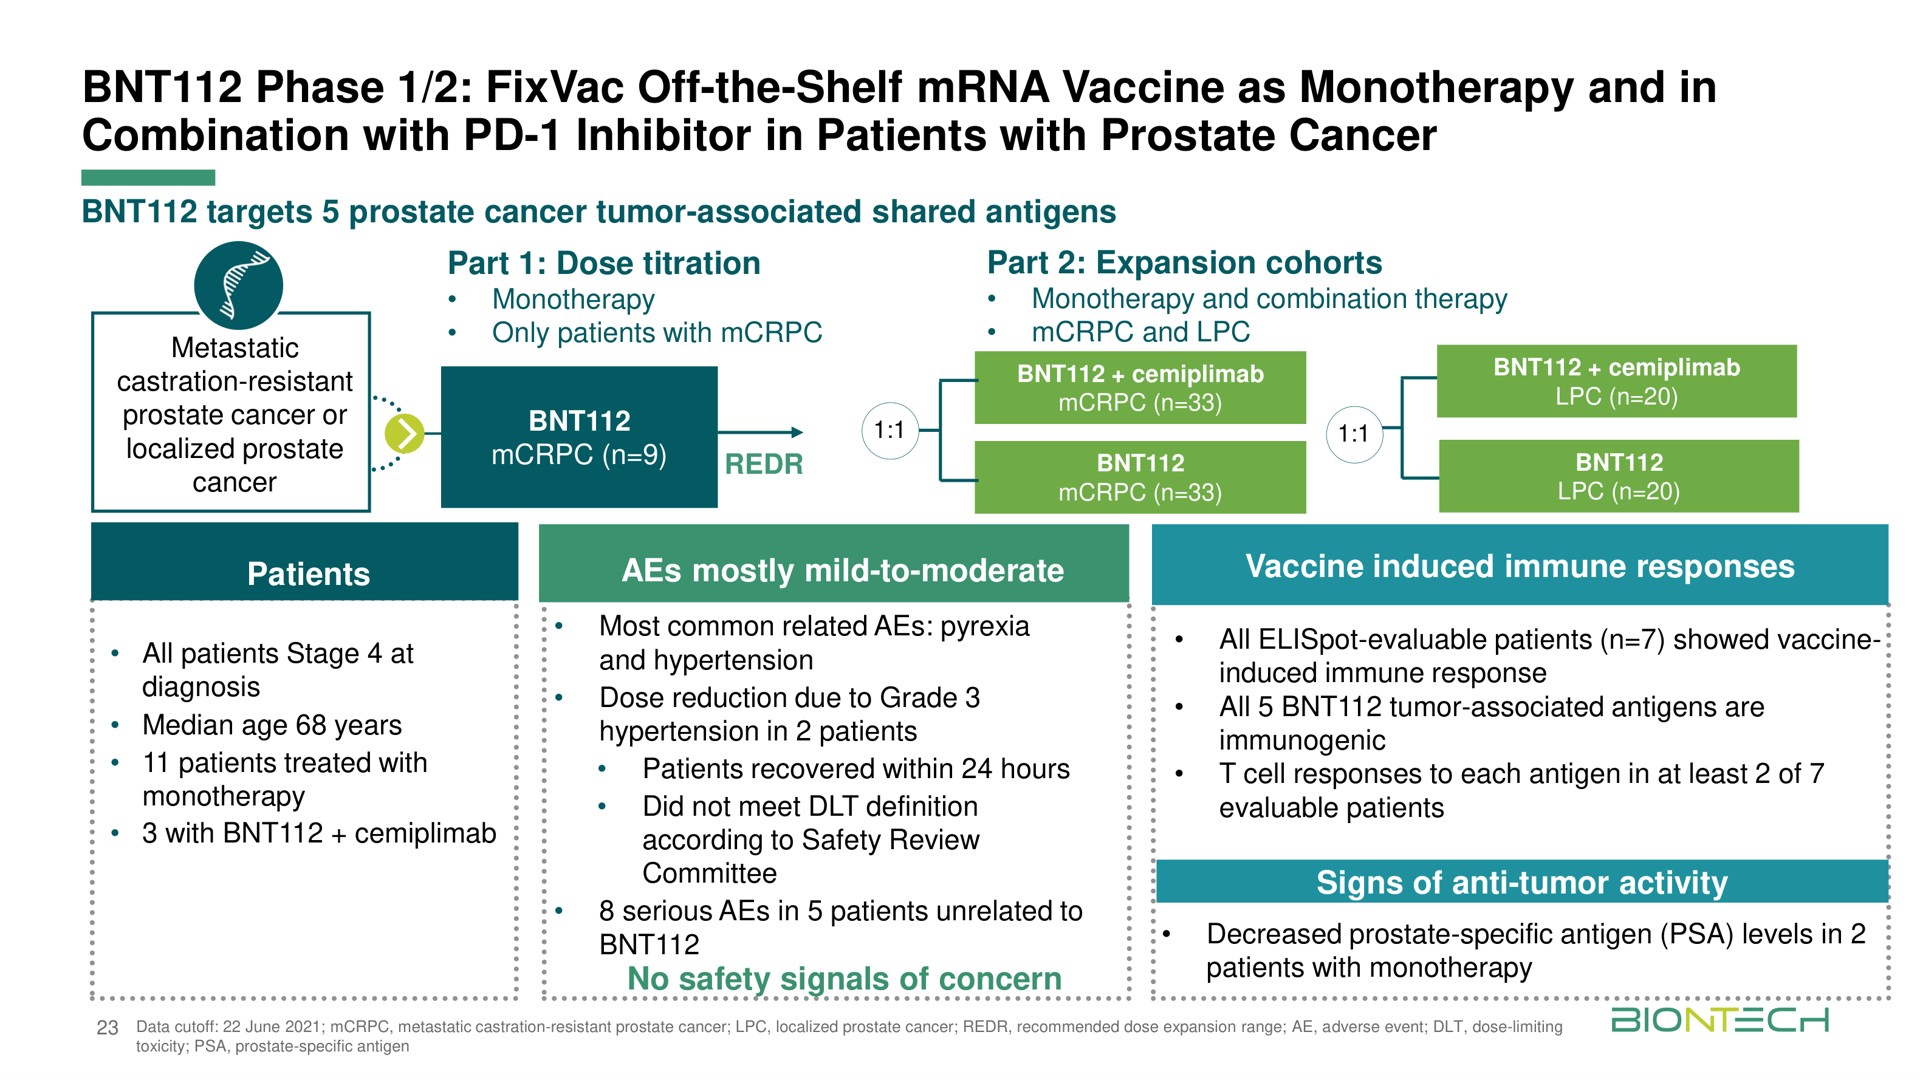 phase off the shelf vaccine as and in combination with inhibitor in patients with prostate cancer median age years hypertension committee i immunogenic signs of anti tumor activity no safety signals of concern | BioNTech